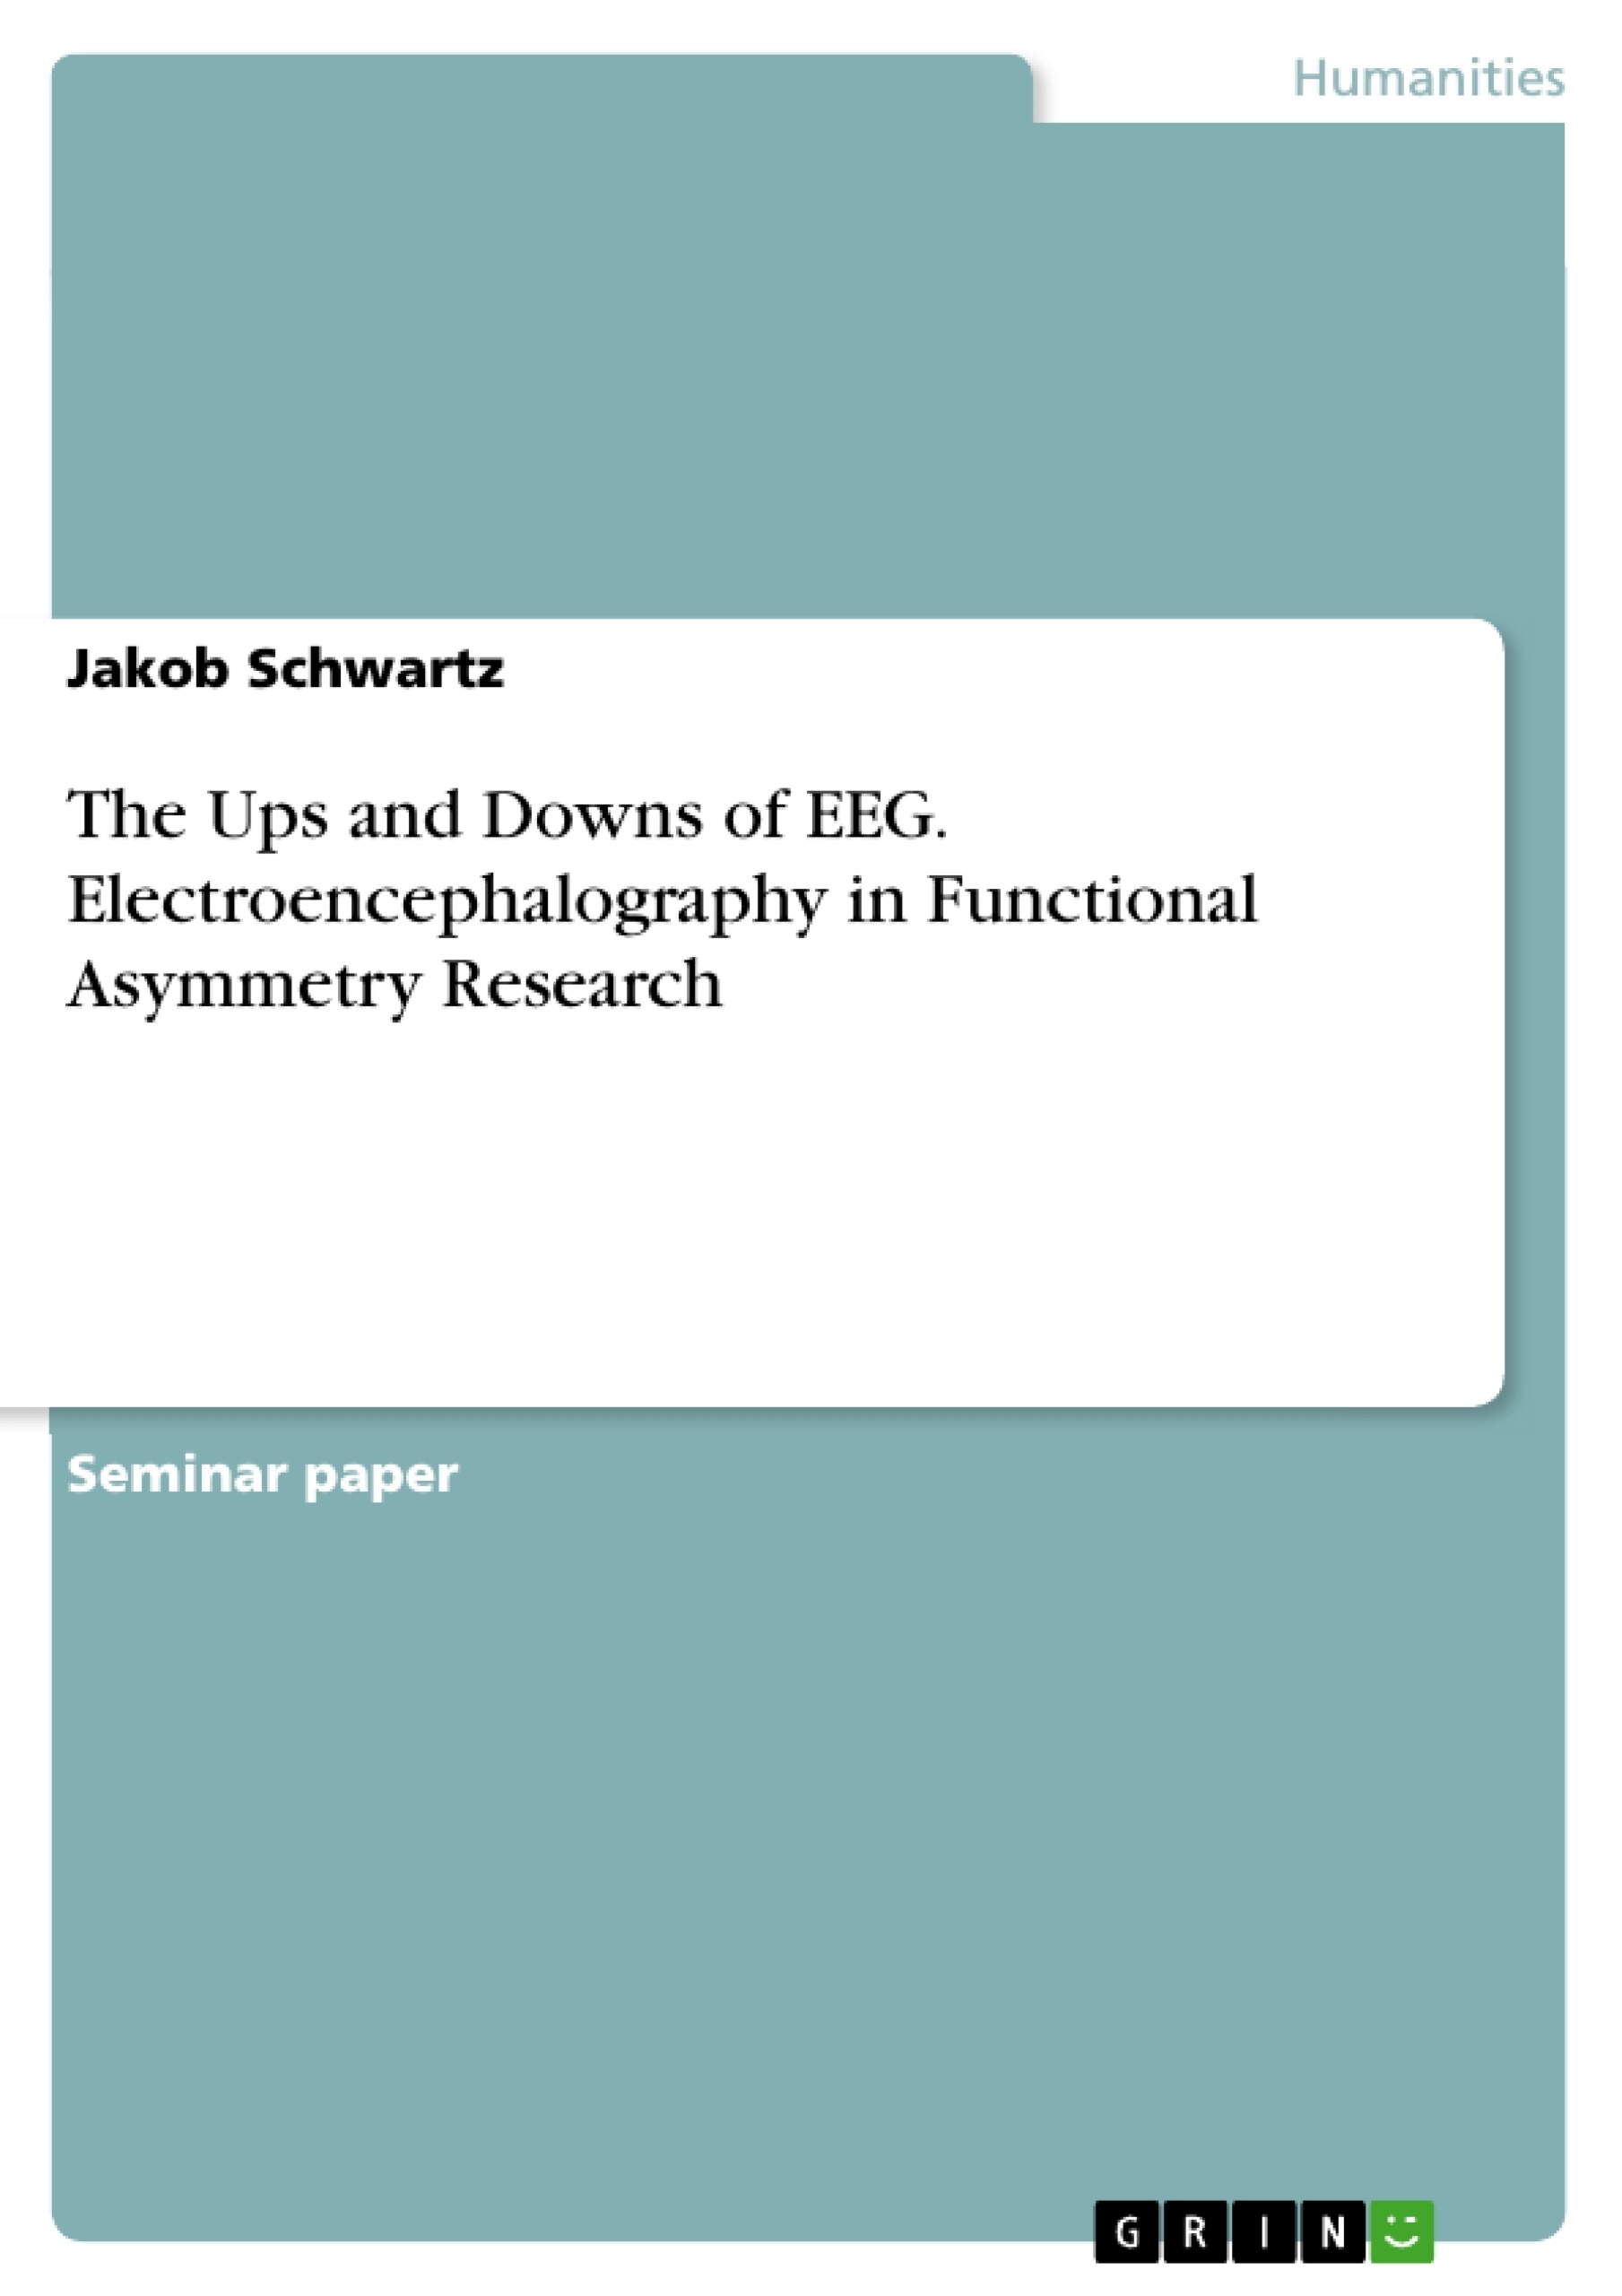 Titel: The Ups and Downs of EEG. Electroencephalography in Functional Asymmetry Research